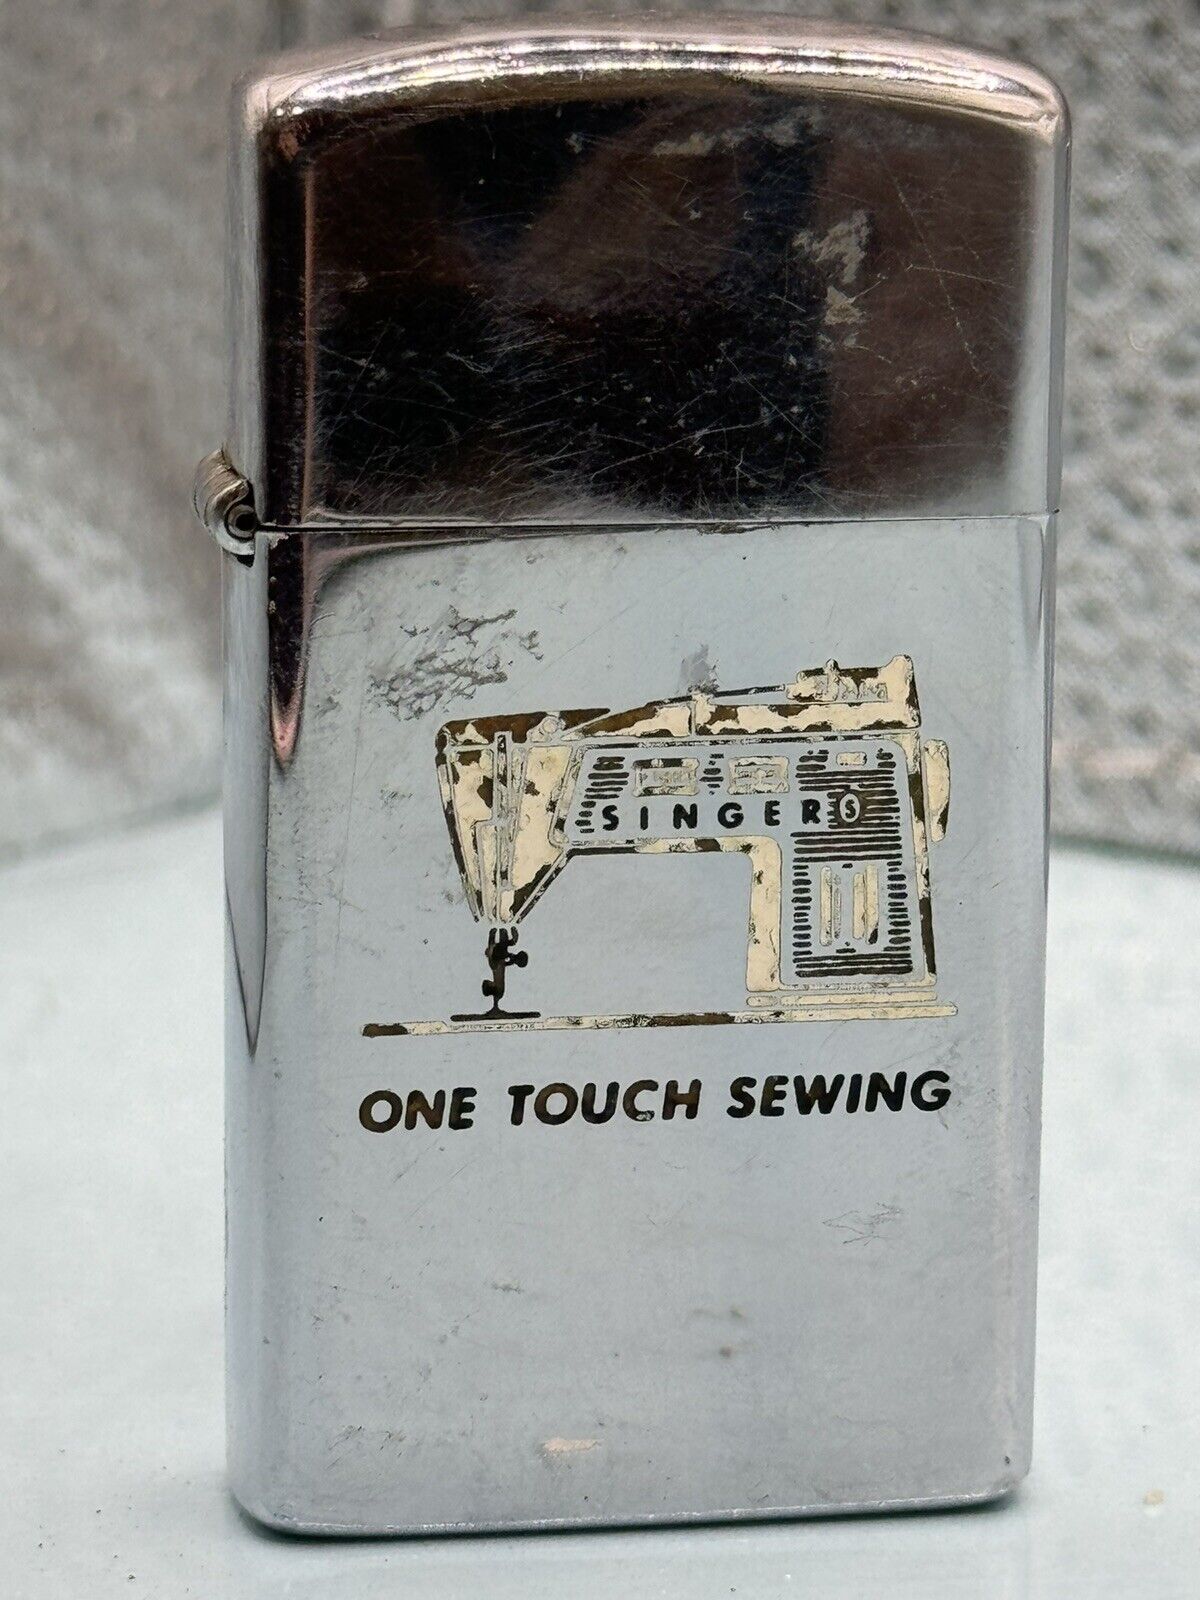 Vintage 1971 One Touch Sewing Advertising HP Chrome Slim Zippo Lighter